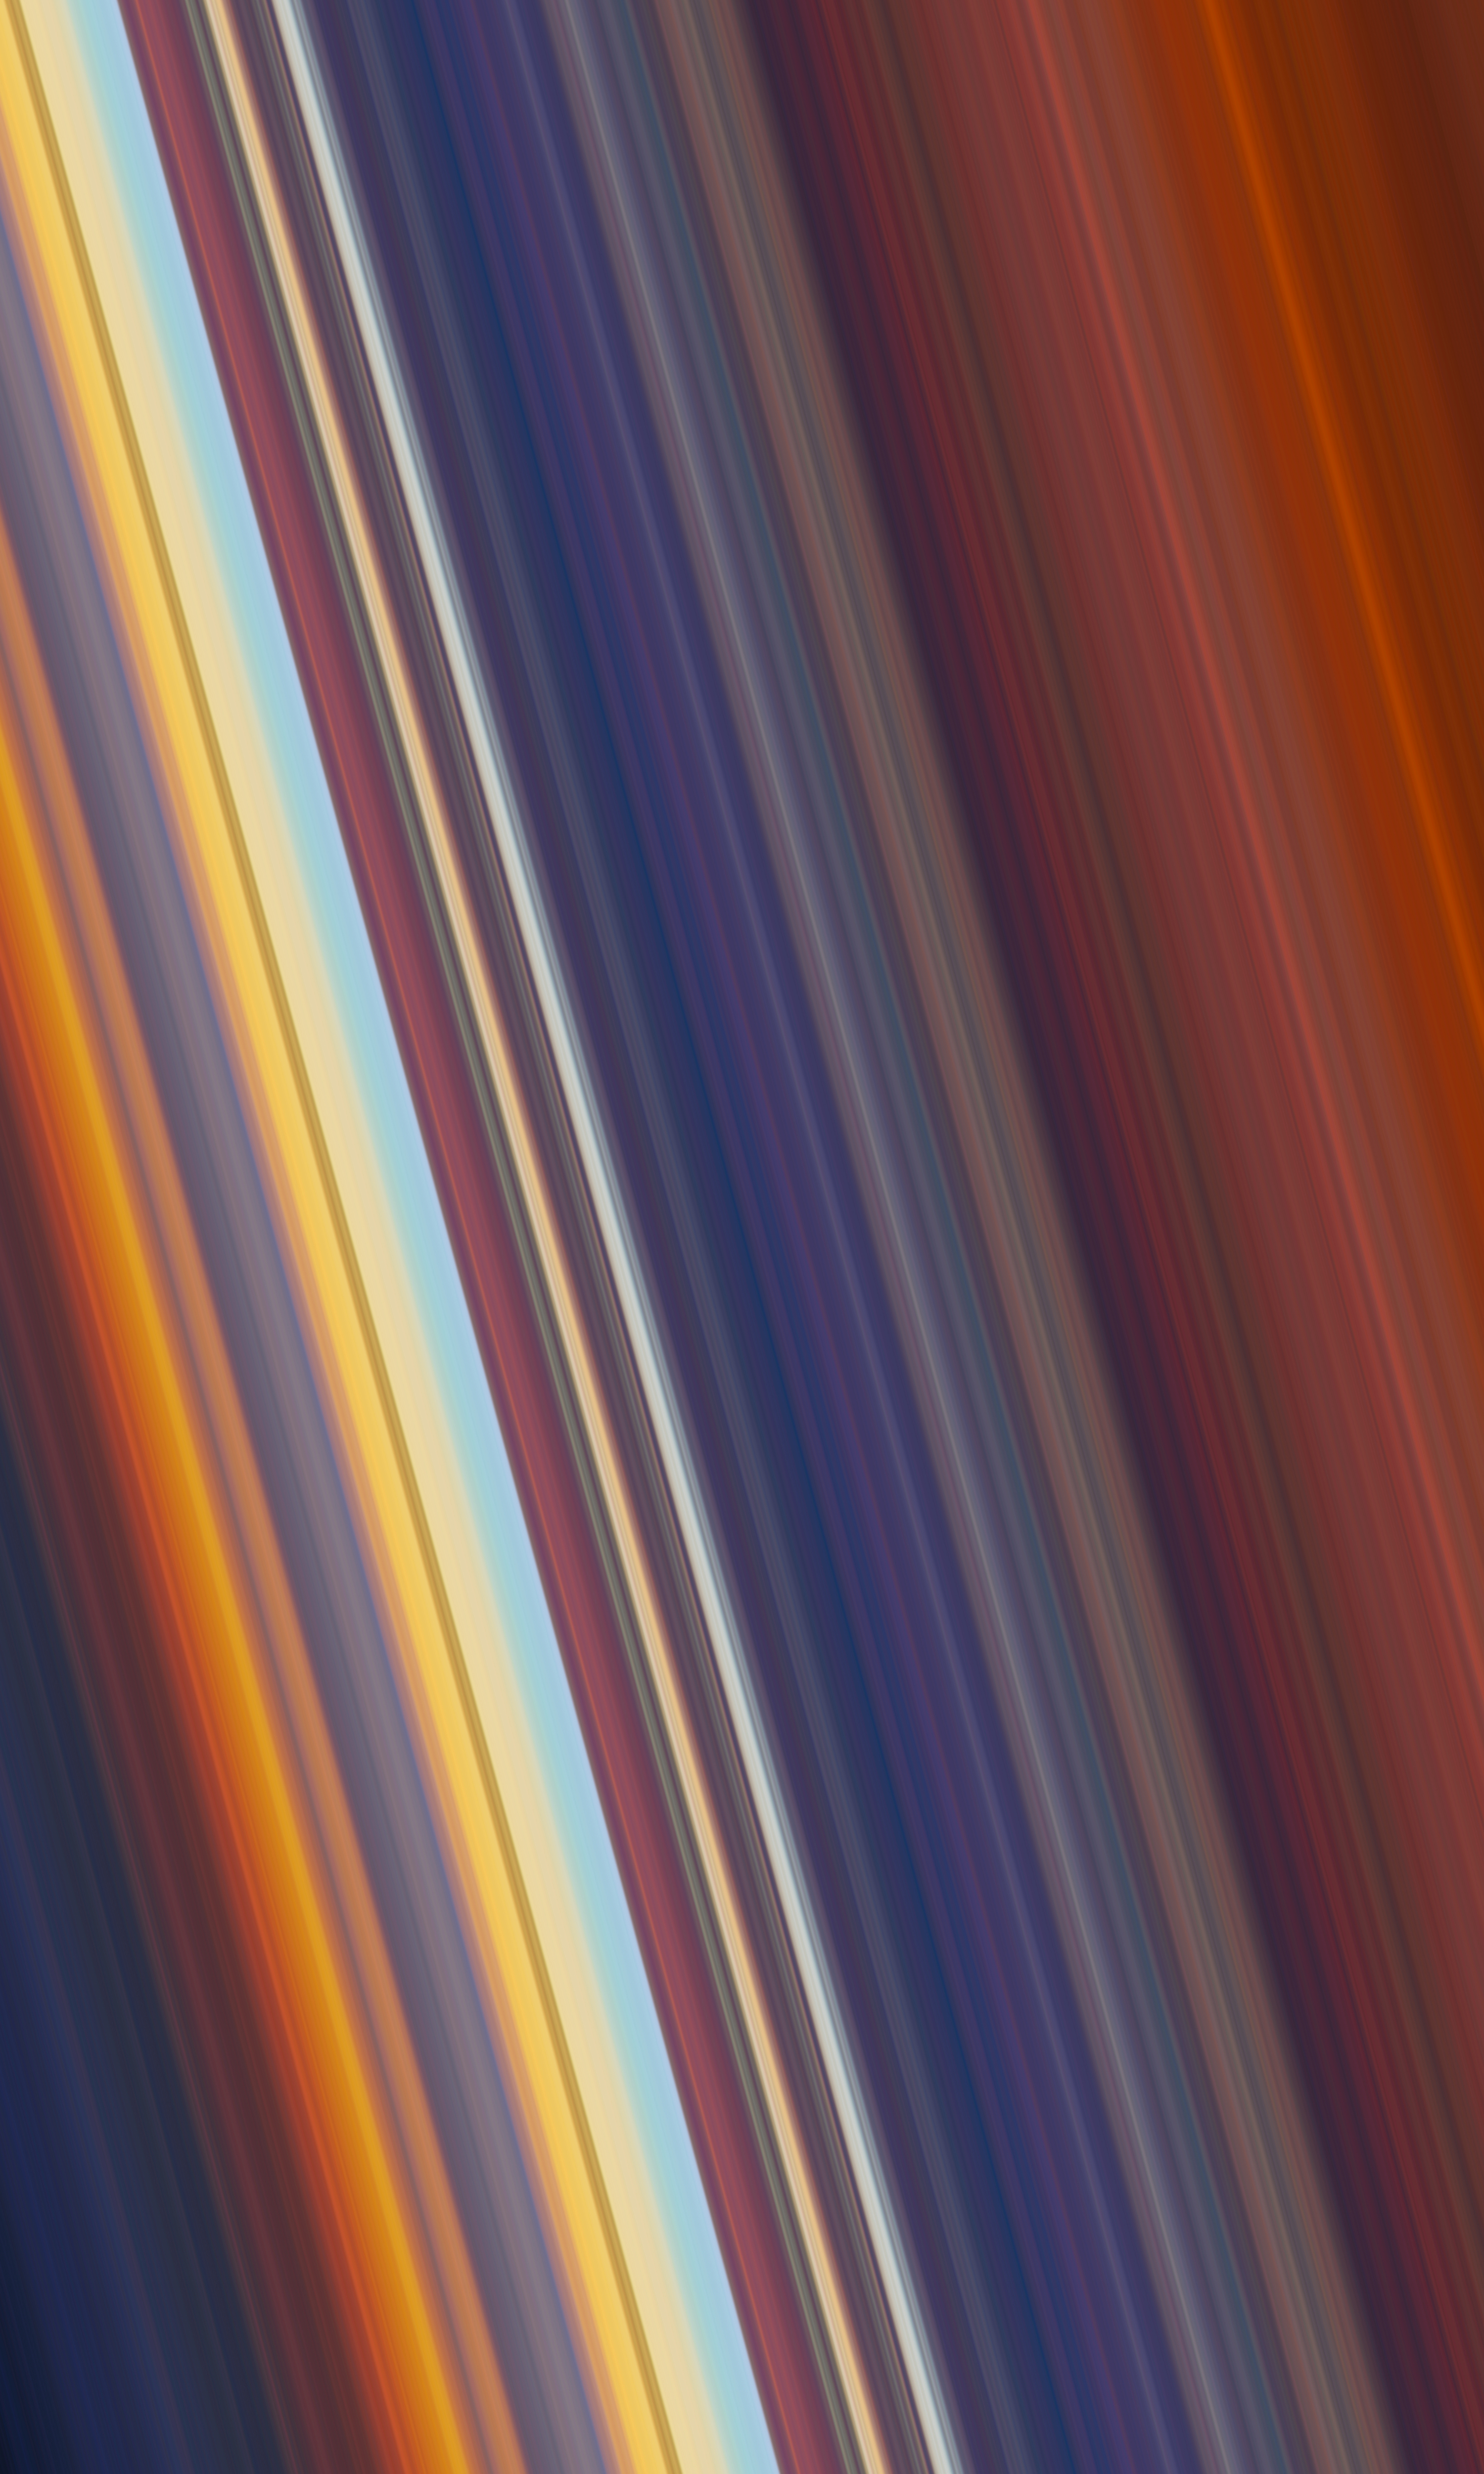 Windows Backgrounds multicolored, abstract, motley, lines, stripes, streaks, obliquely